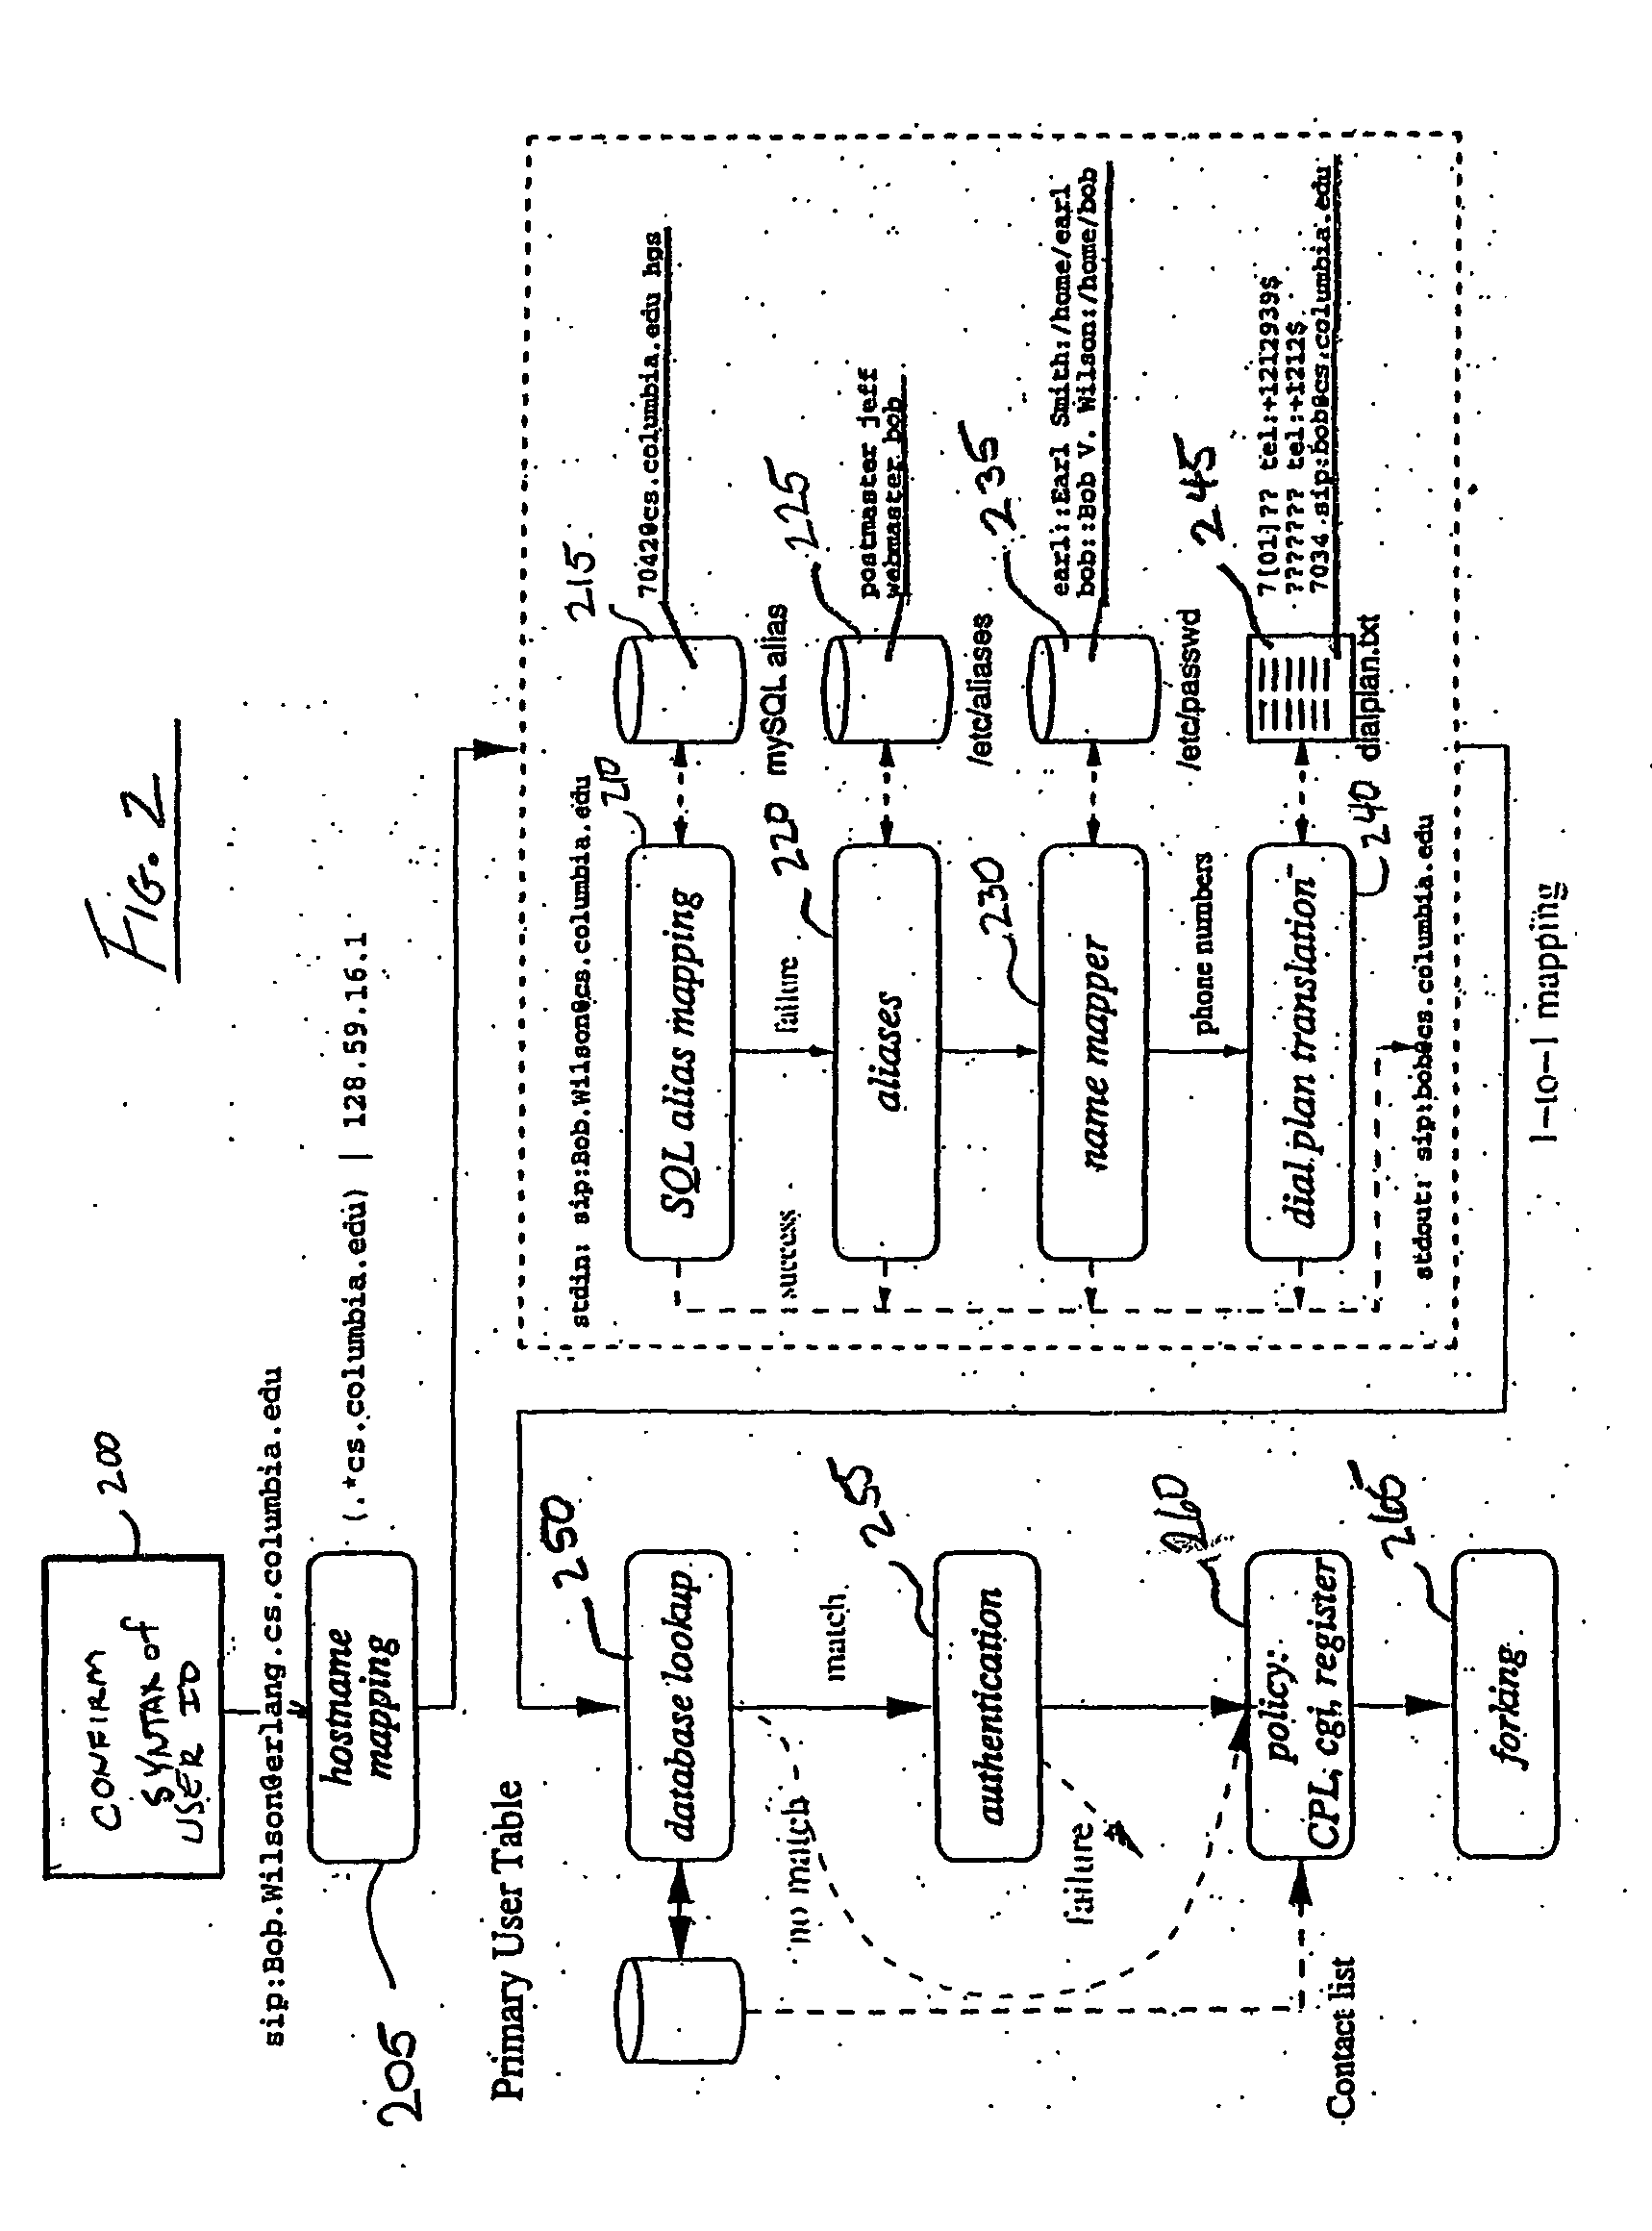 System and method for call routing in an ip telephony network